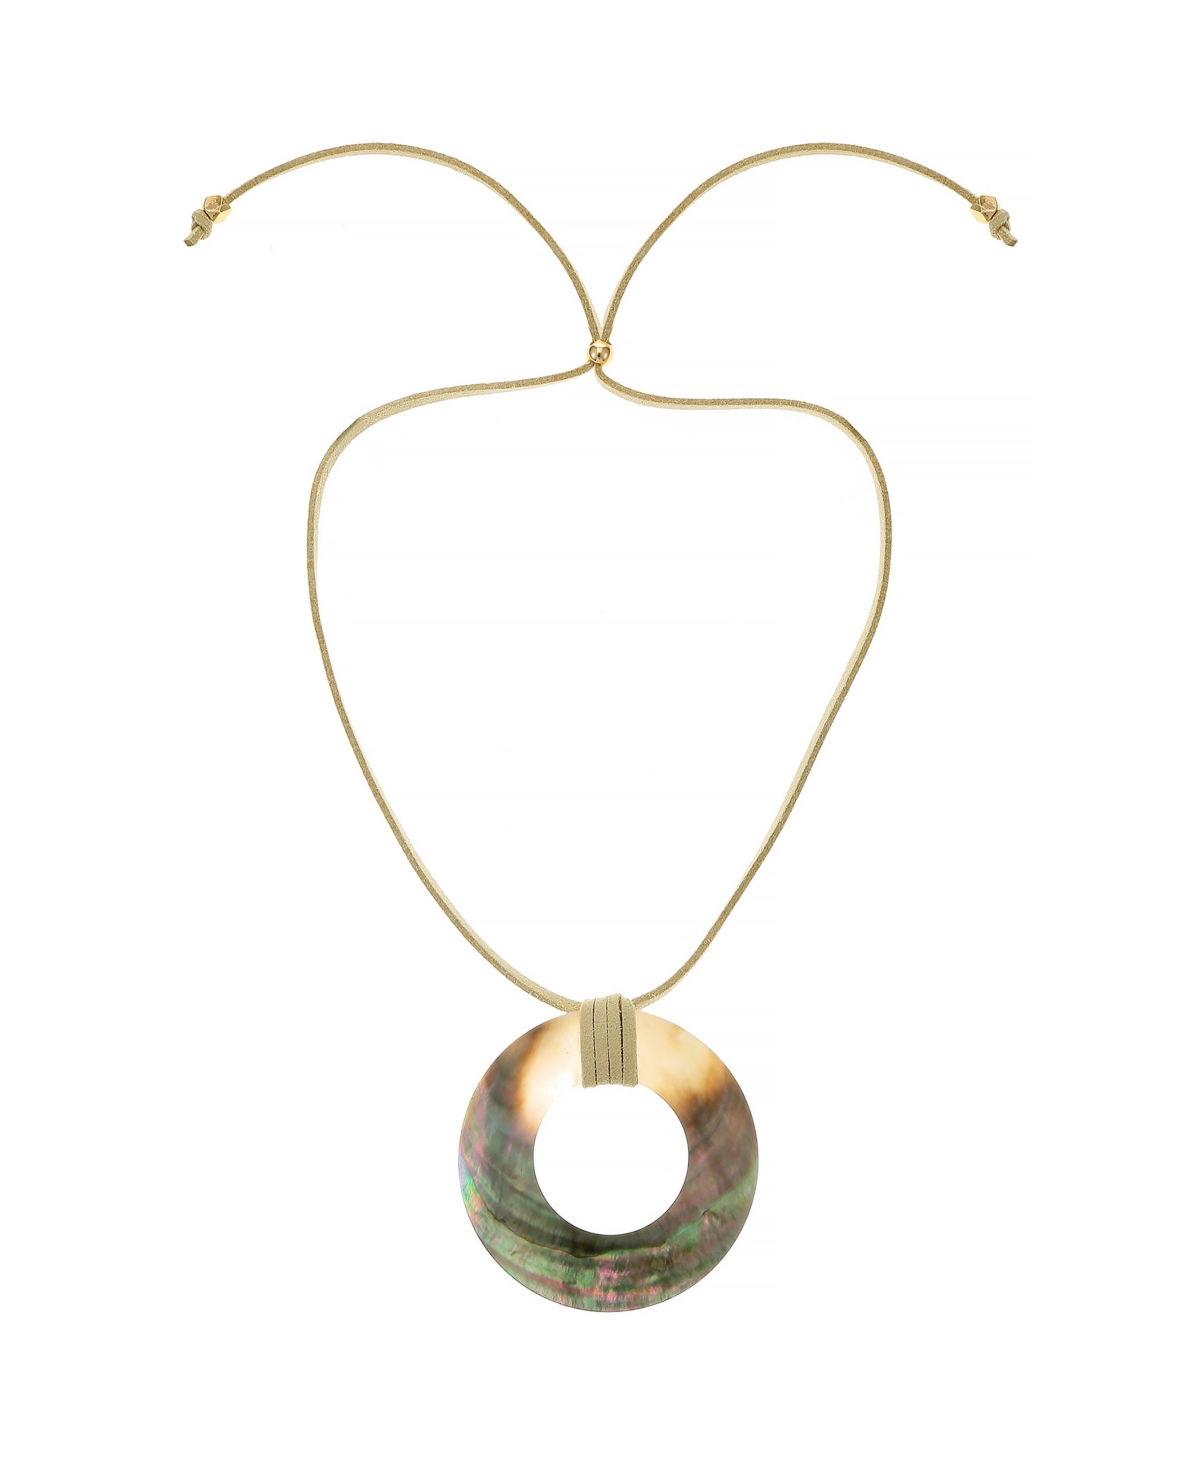 Ettika 18k Gold Plated Iridescent Shell Circle Pendant Adjustable Necklace In Beige